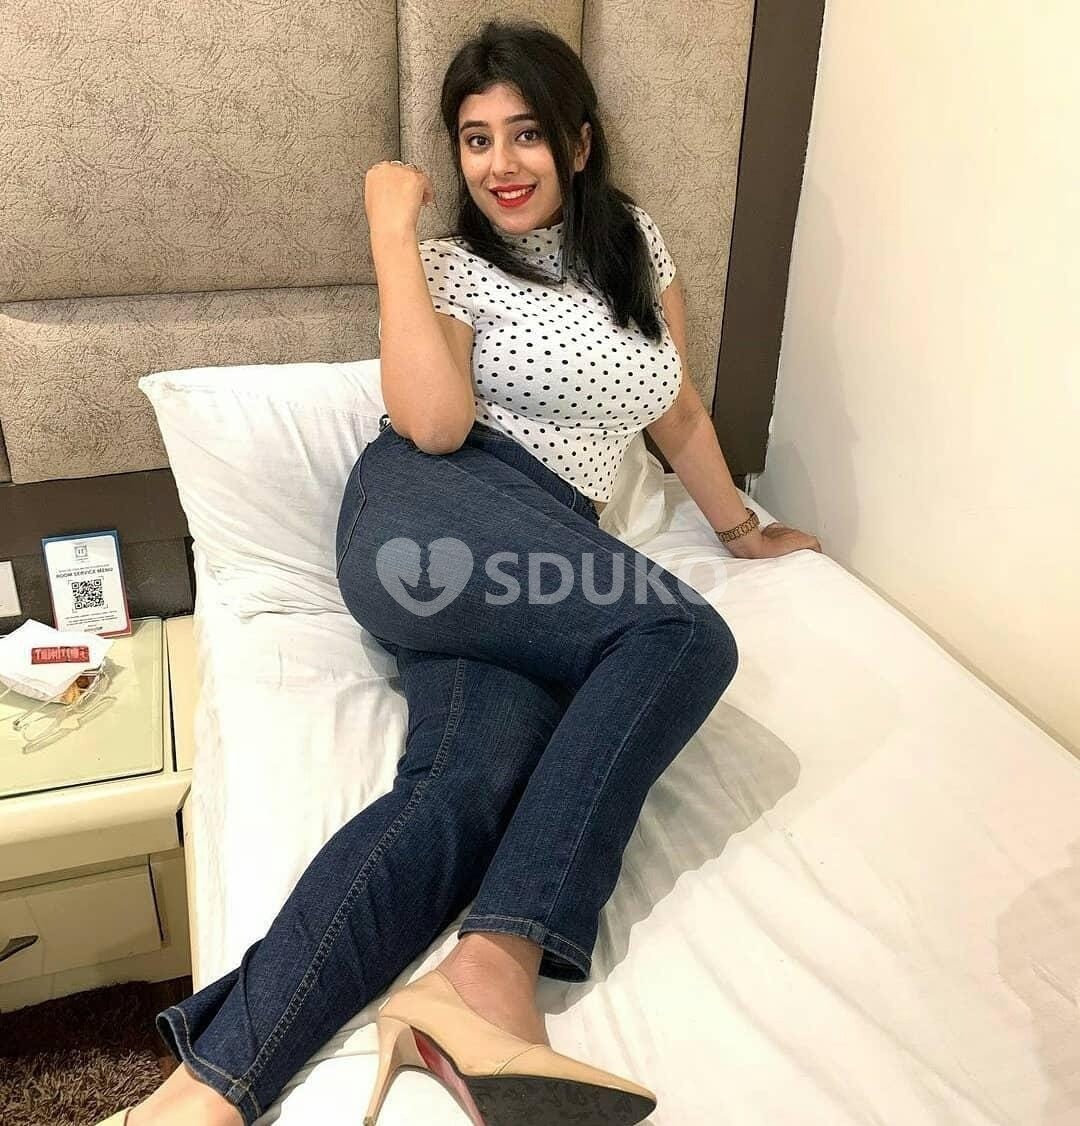 Greater Noida ⭐royal⭐genuine service Best VIP Independent Safe and Secure Hotel and Home Service at Low Price Call M